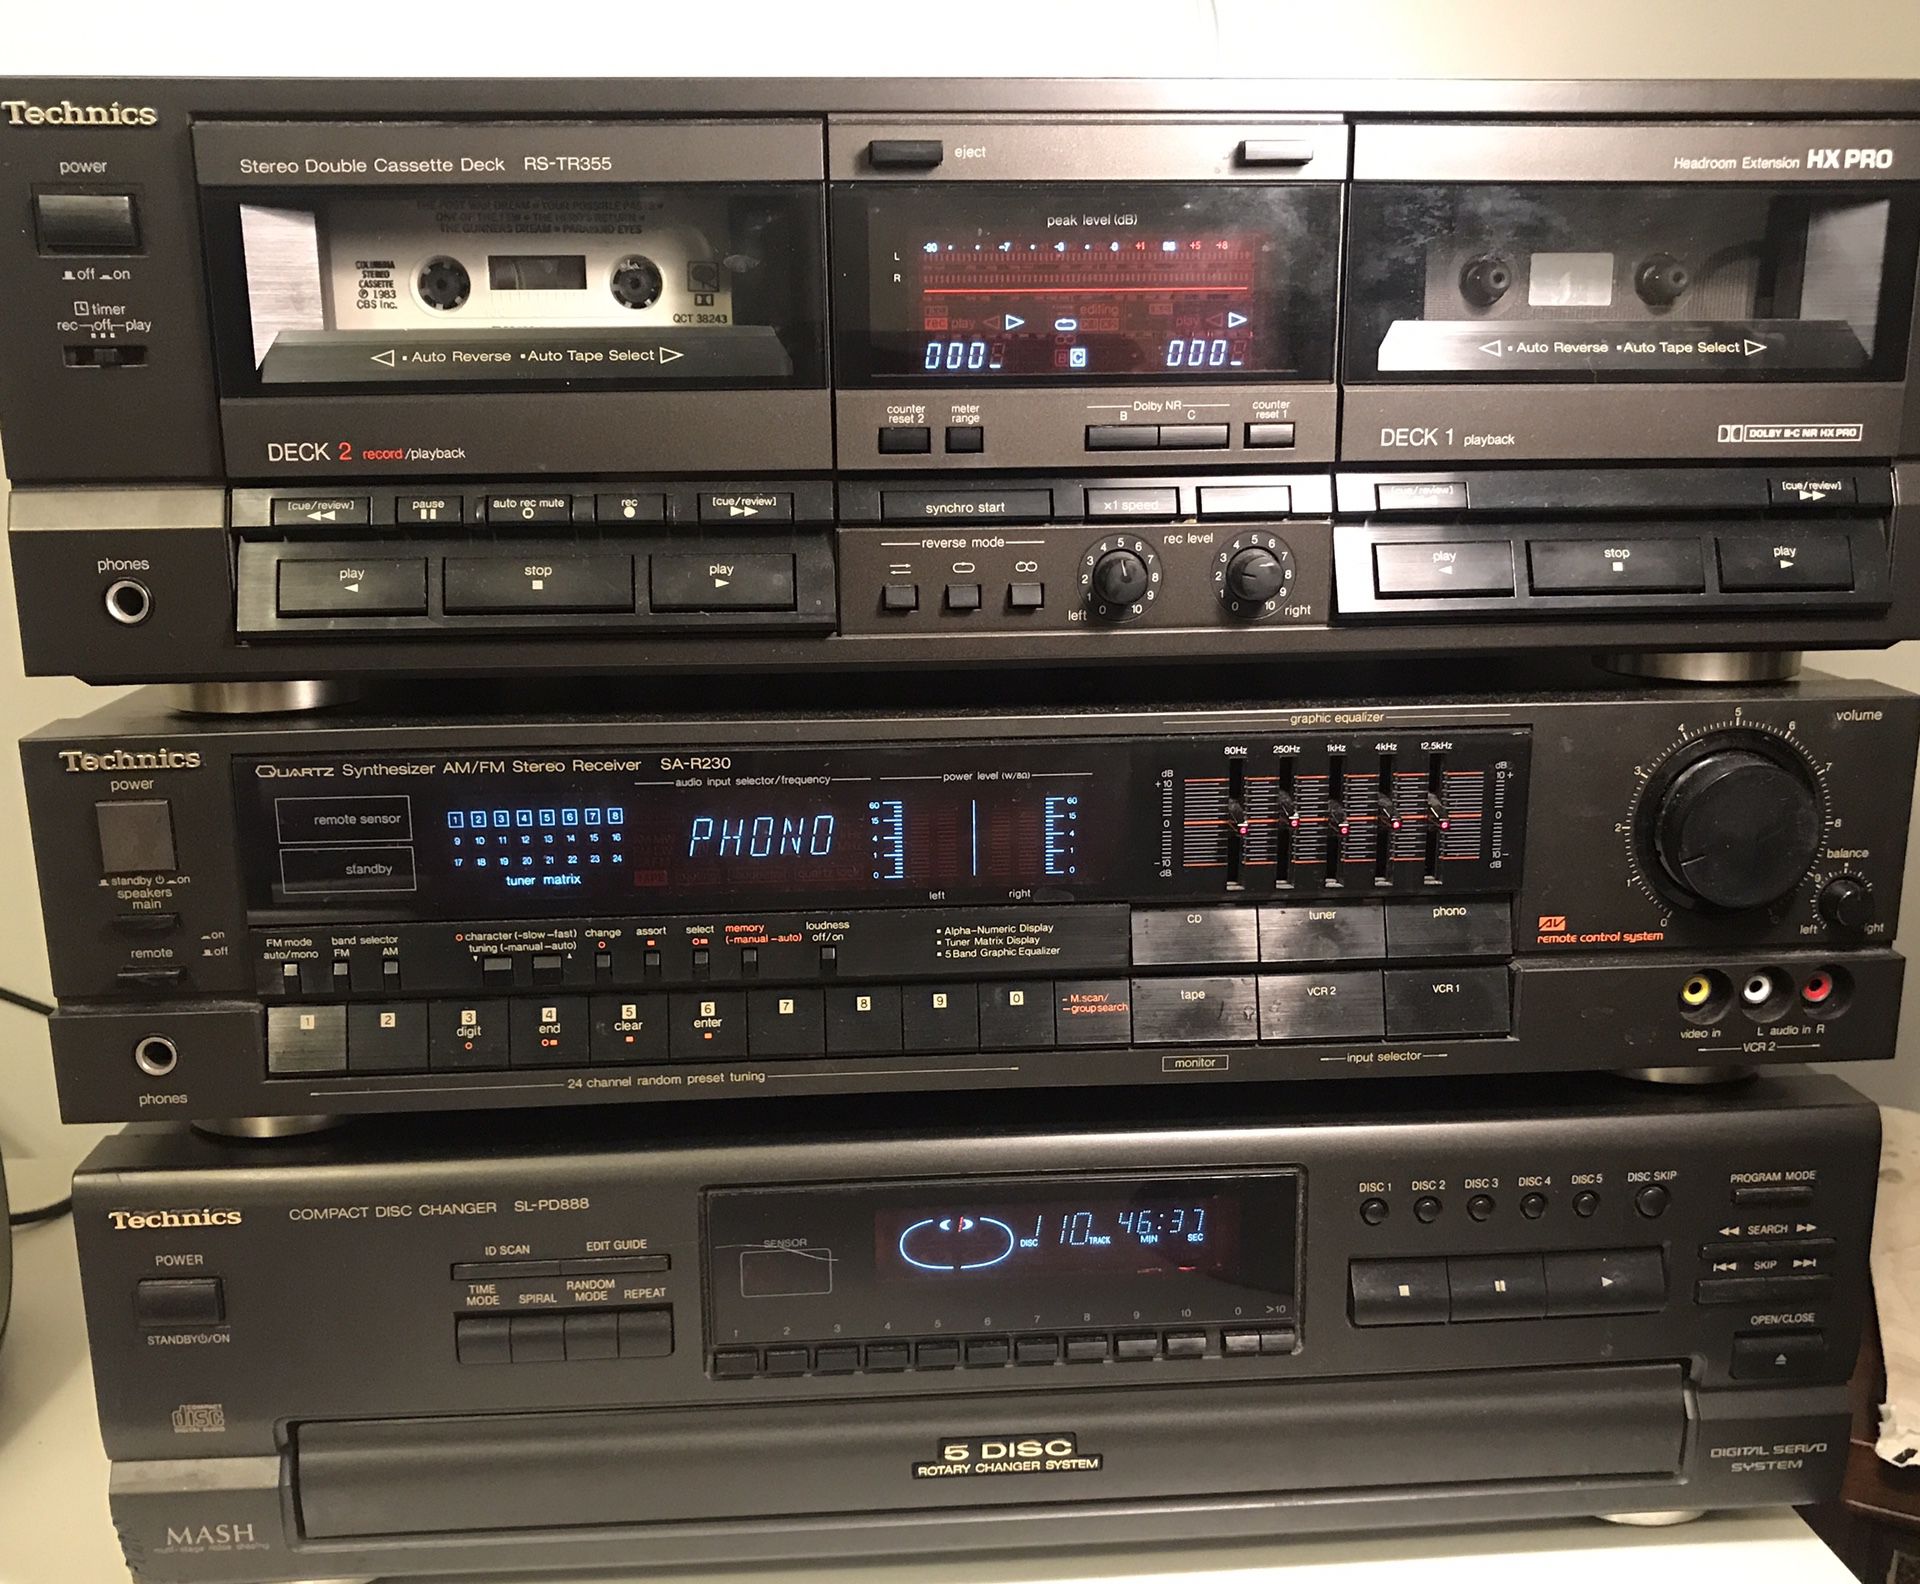 Technics system with Cassette RS-TR355, Stereo Receiver SA-R230, and Compac Disc SL-PD888